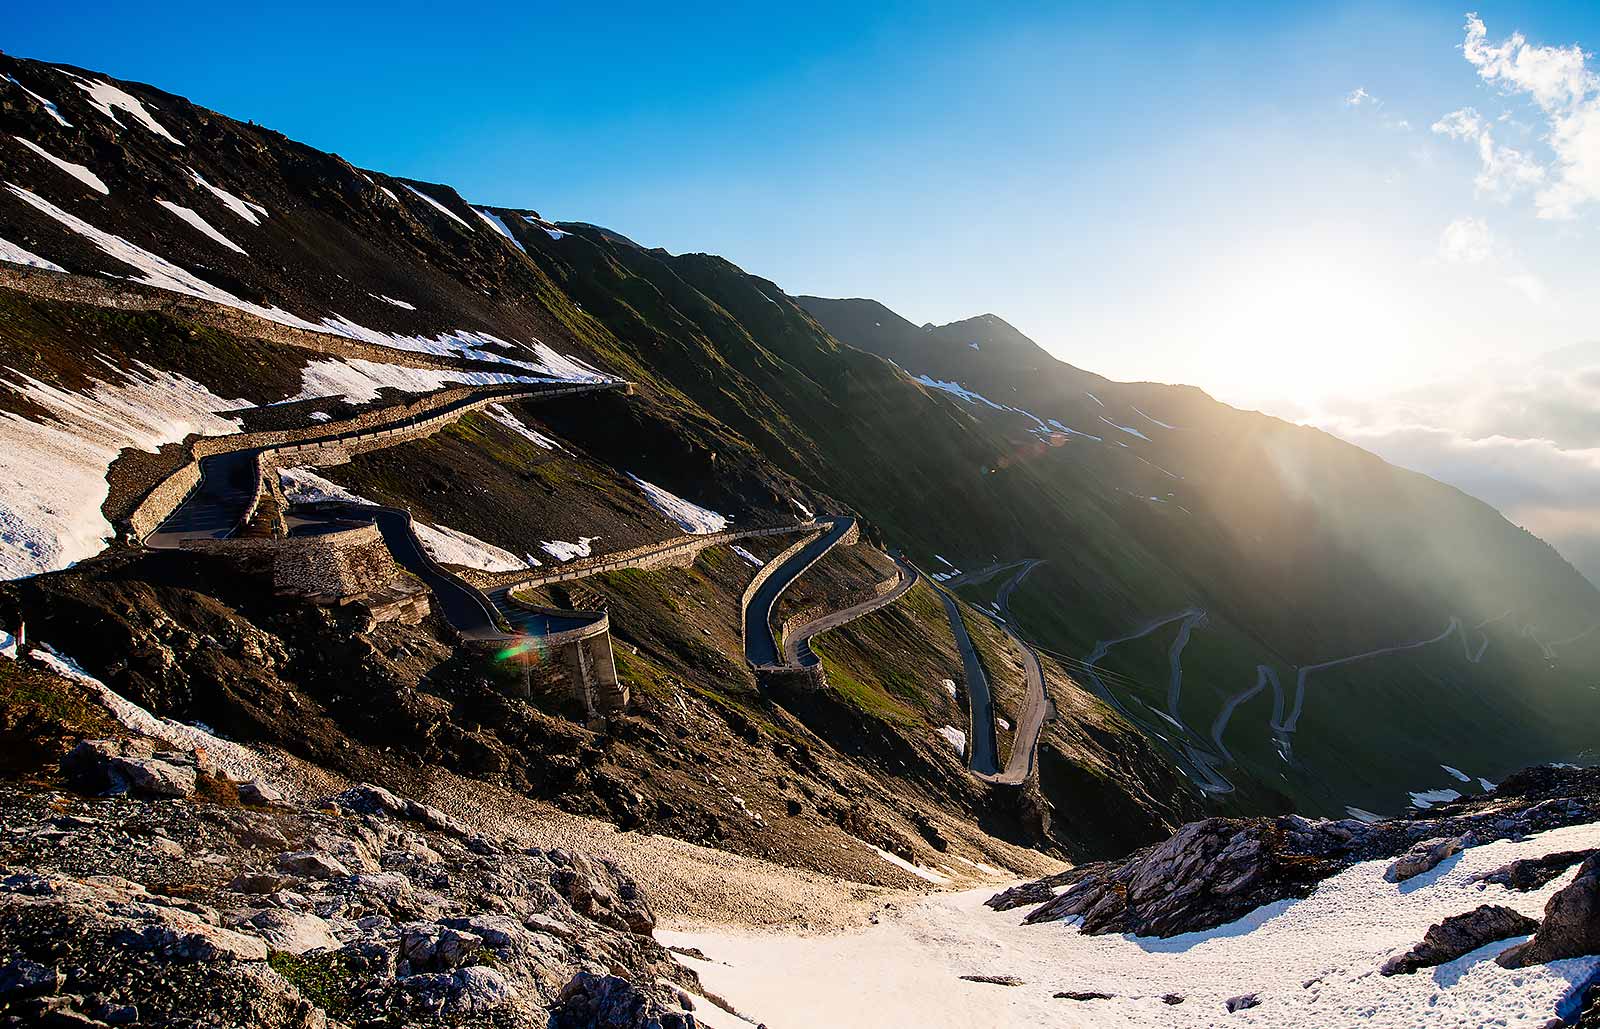 The winding road that leads to passo dello Stelvio covered with little snow